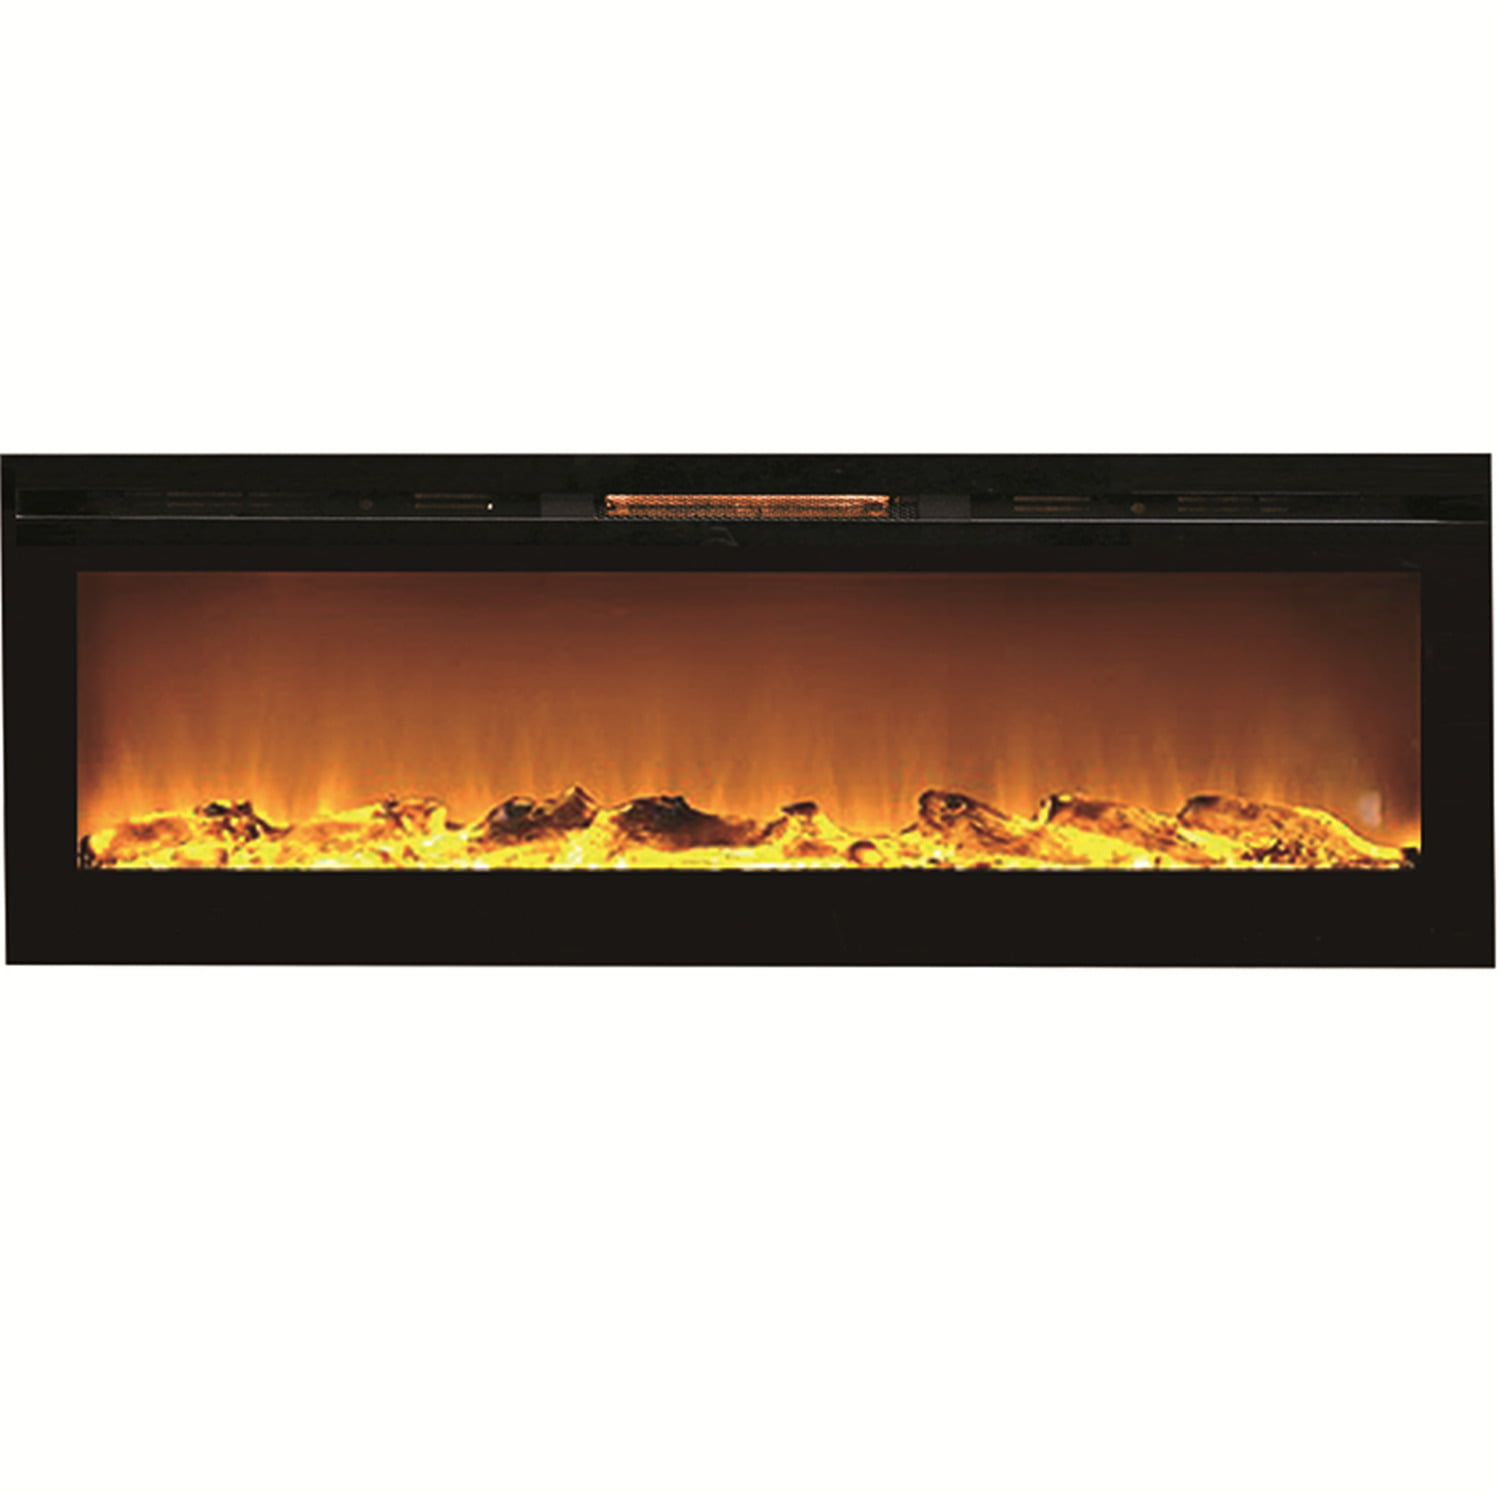 Regal Flame Gotham 72 Inch Built-in Ventless Heater Recessed Wall Mounted Electric Fireplace - Log